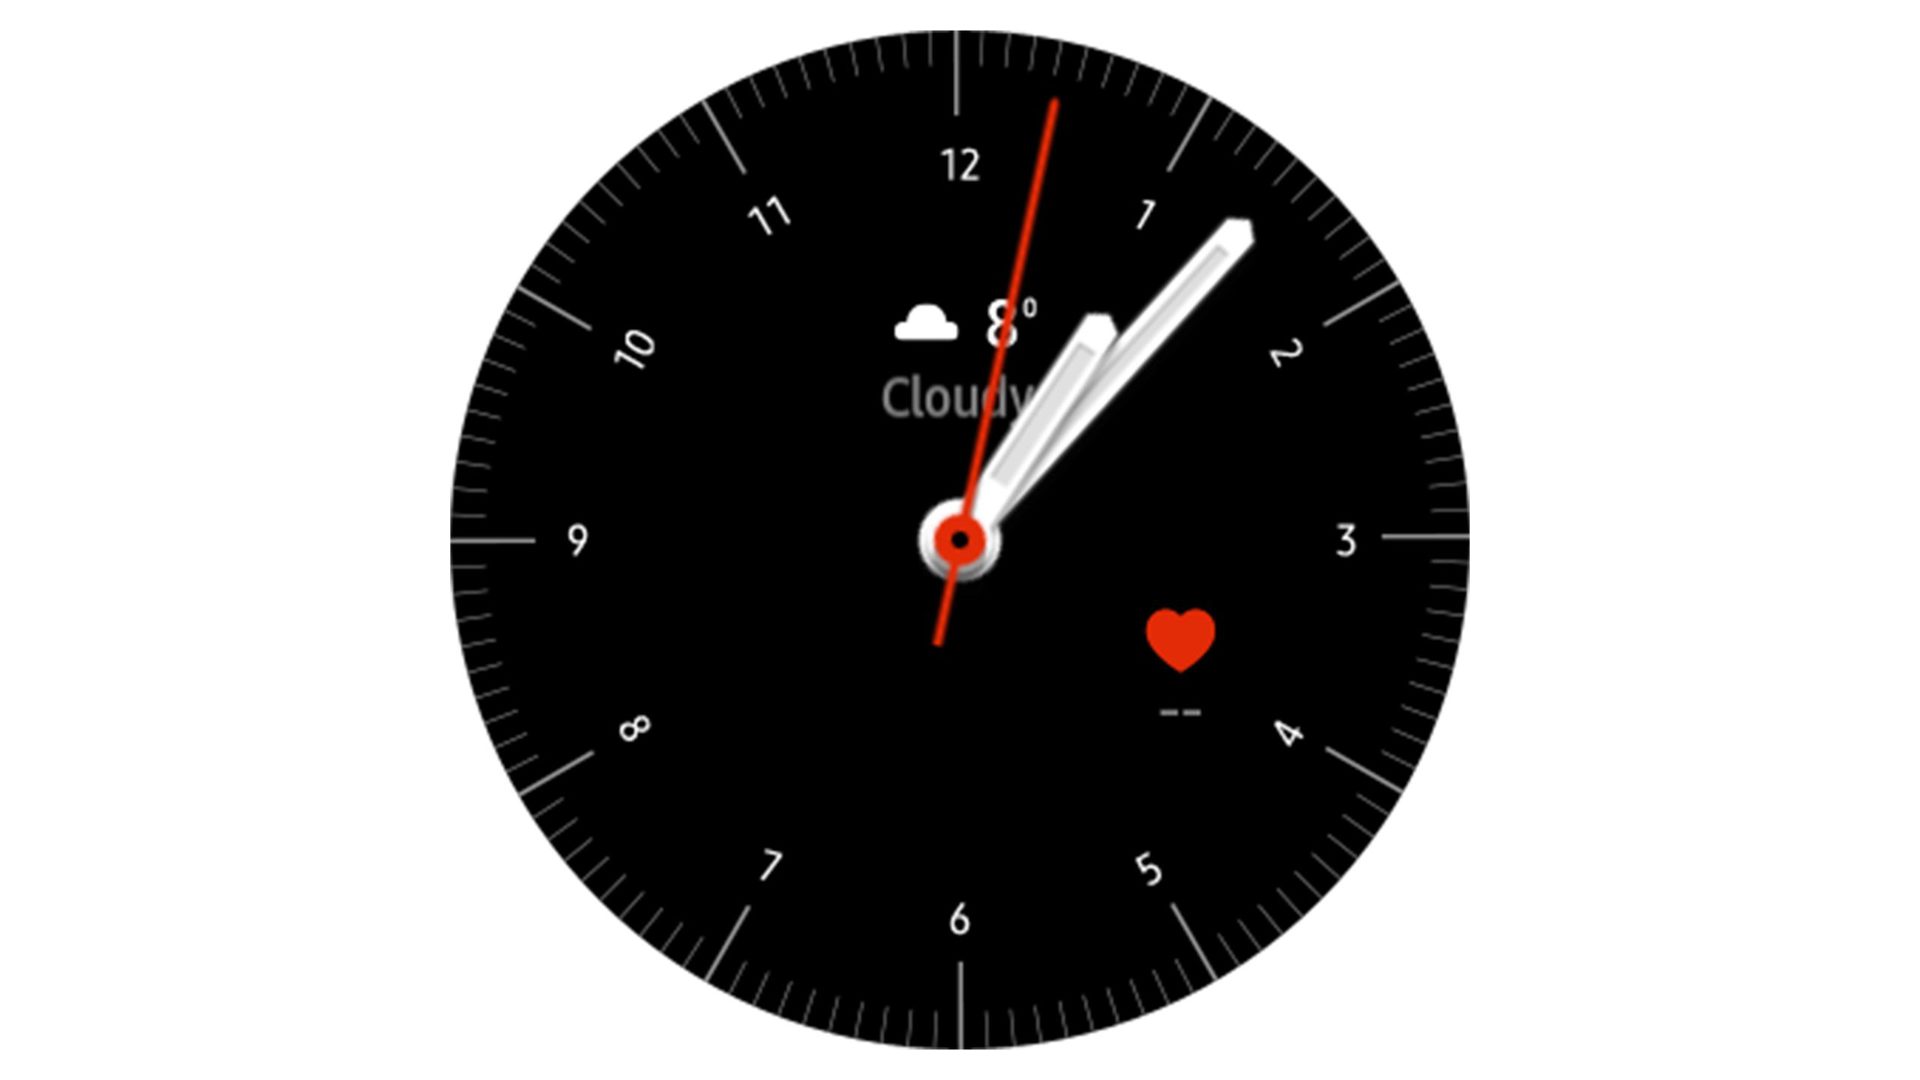 A screenshot from a Samsung Galaxy Watch Active 2 of the Tizen watch face Simple Analog